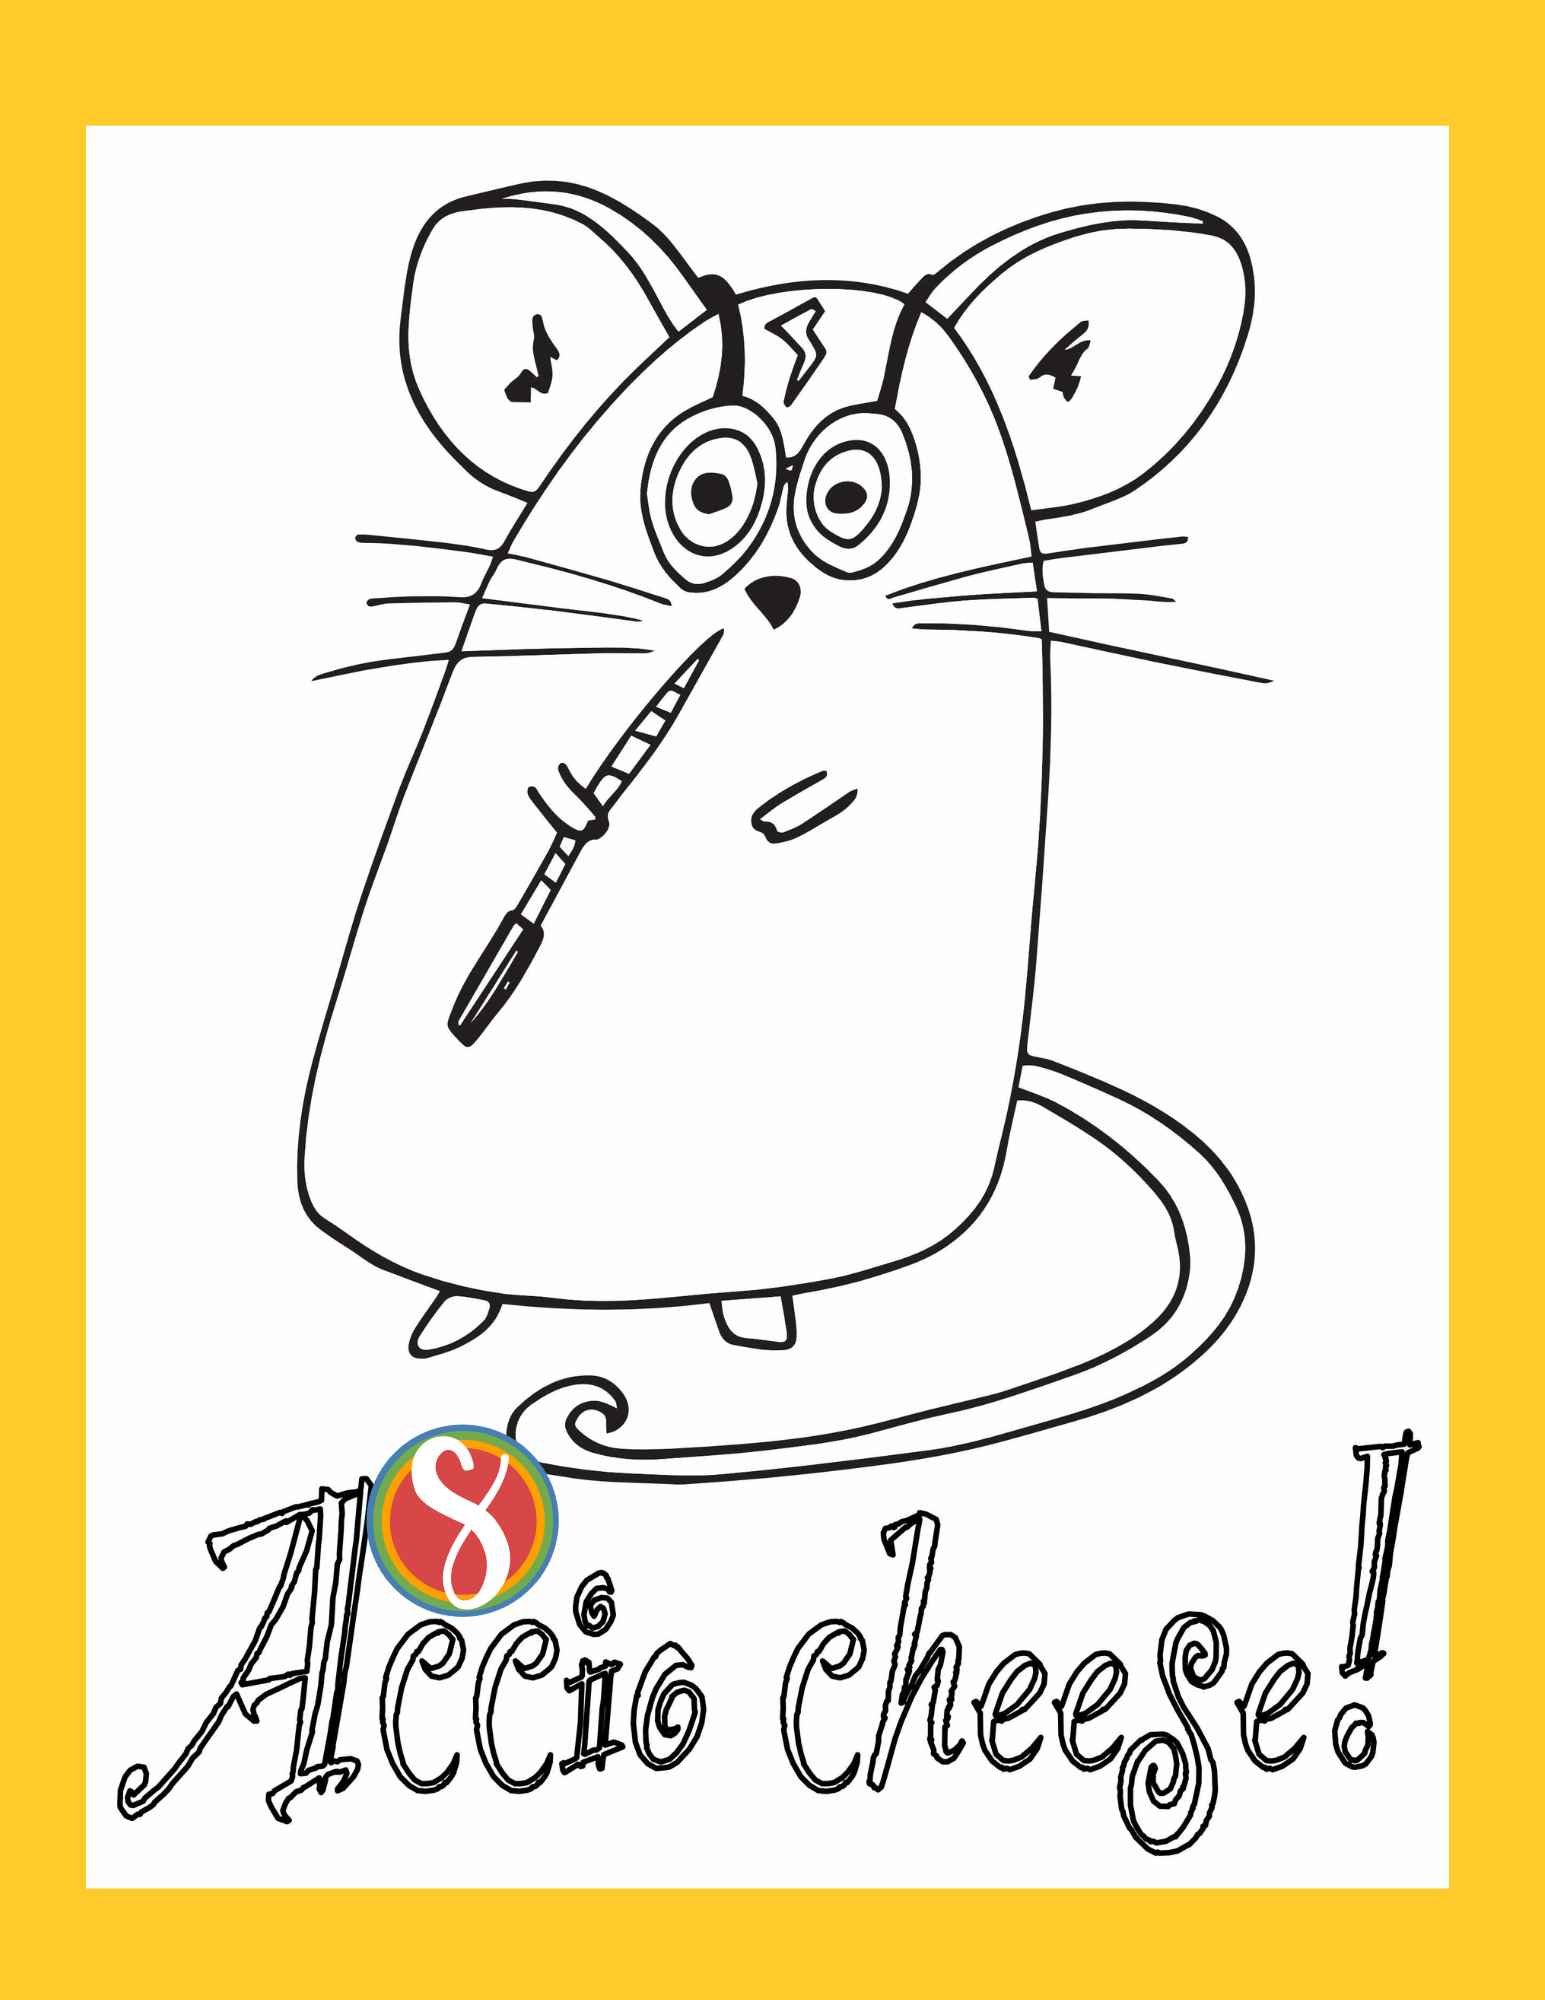 a cute mouse to color, wearing Harry Potter glasses, a lightening scar, a wand, and colorable text "Accio cheese"